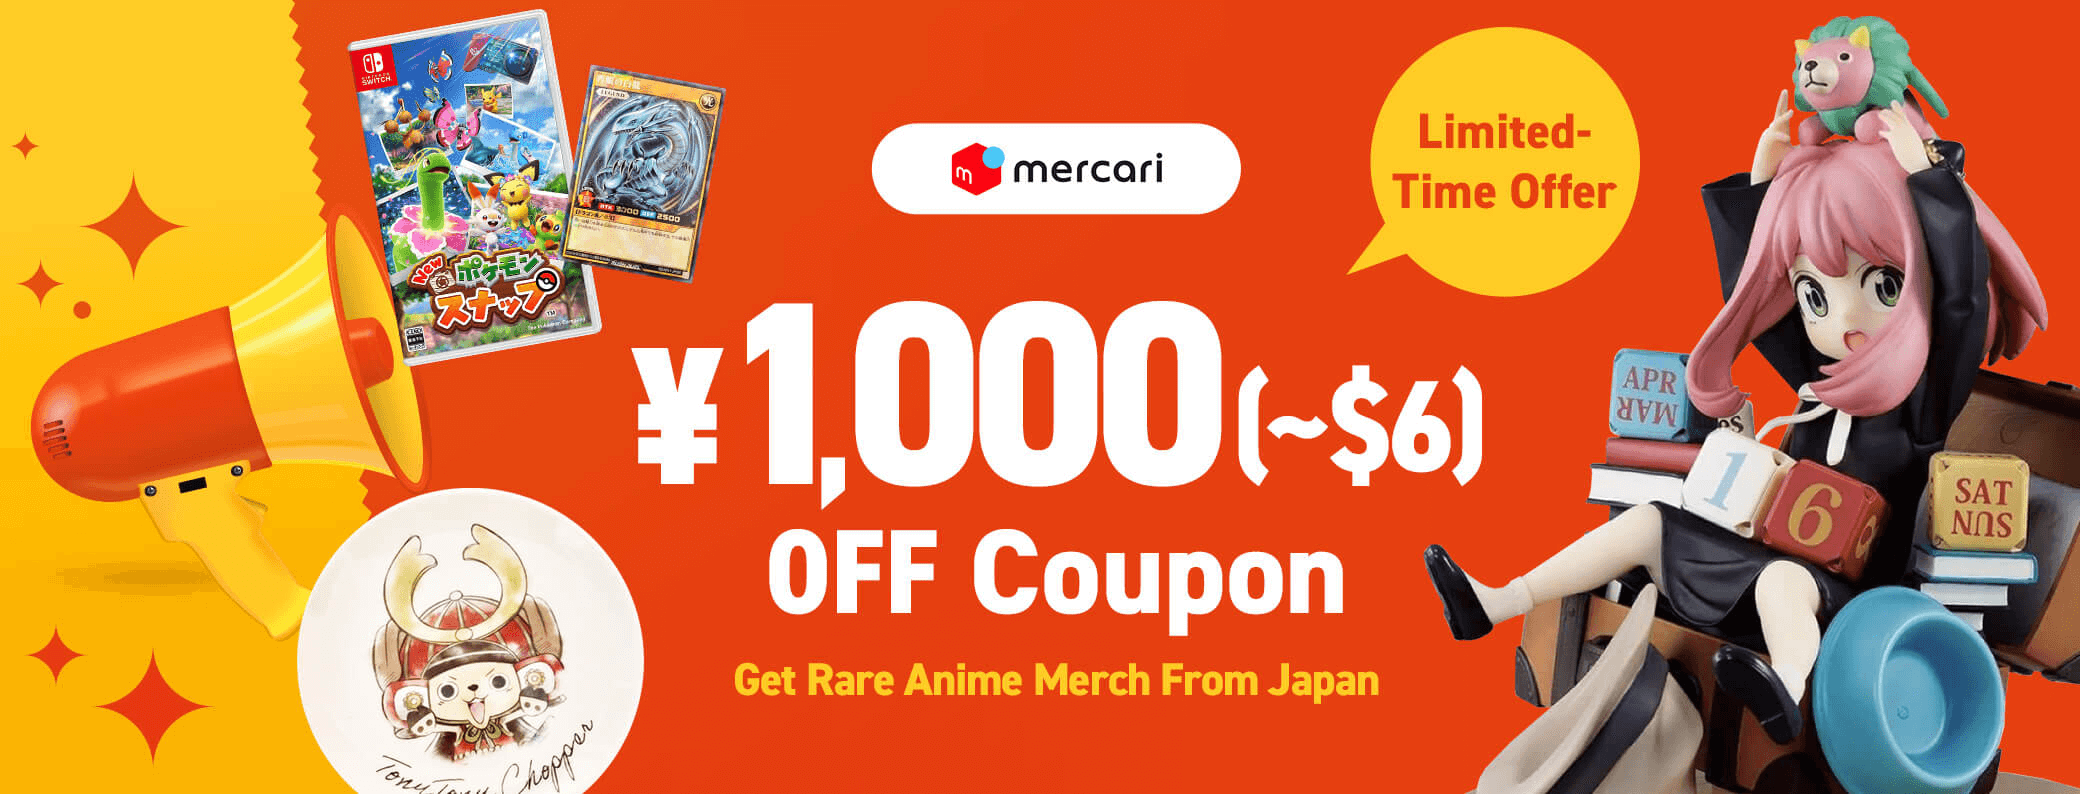 Limited Time Offer - Buyee Mercari Coupon for Rare Anime Merch